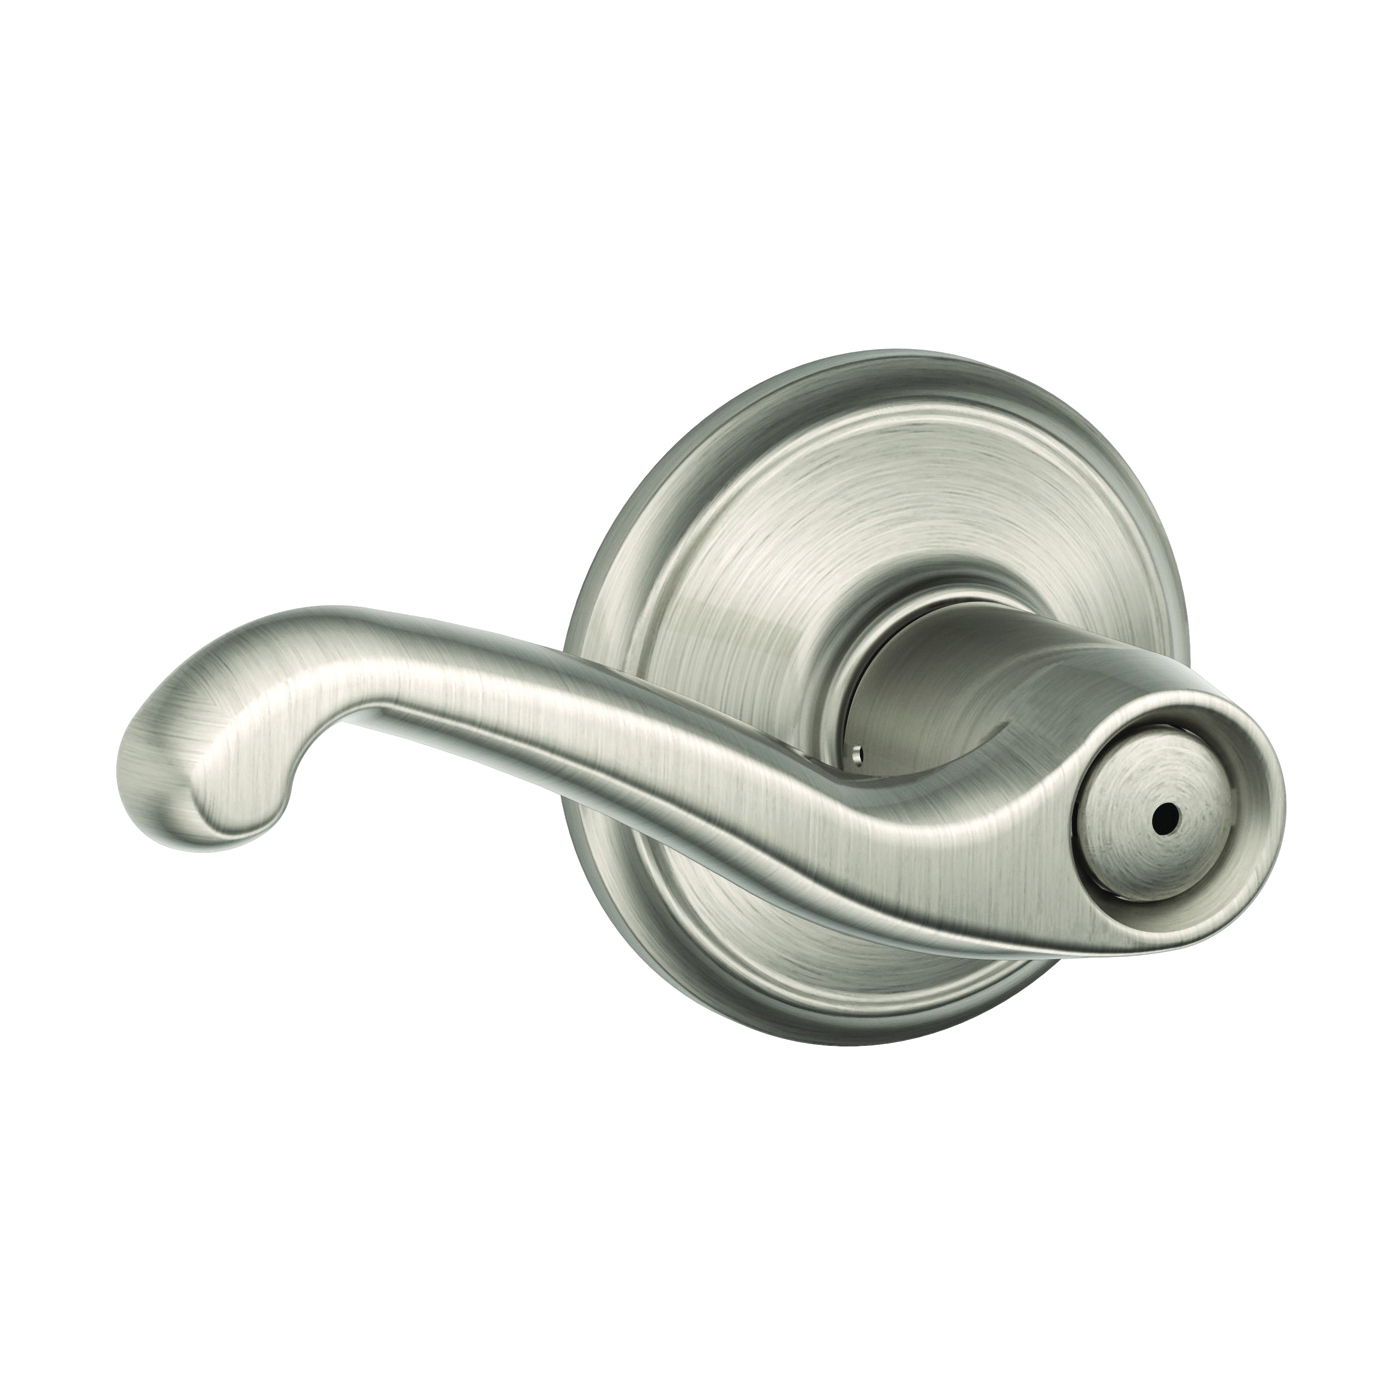 Schlage F Series F40VFLA619 Privacy Lever, Mechanical Lock, Satin Nickel, Metal, Residential, 2 Grade